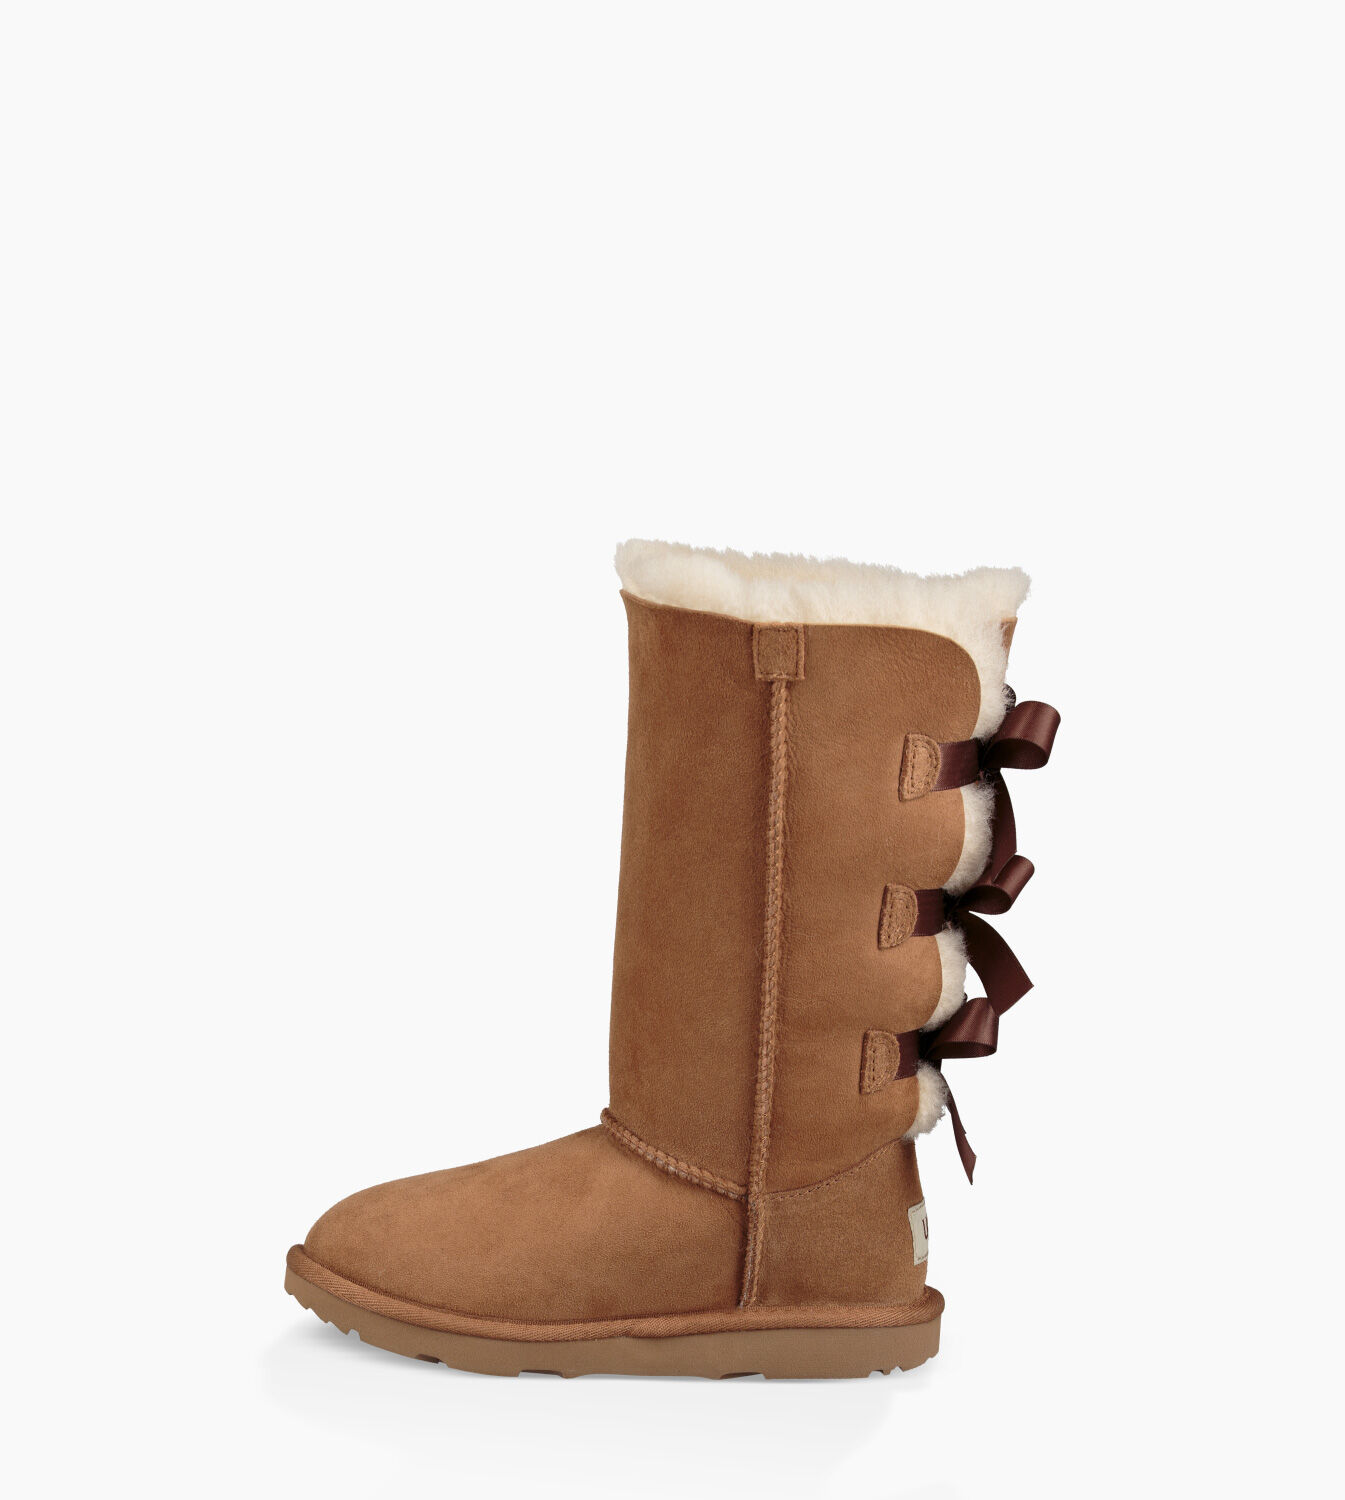 tall brown uggs with bows